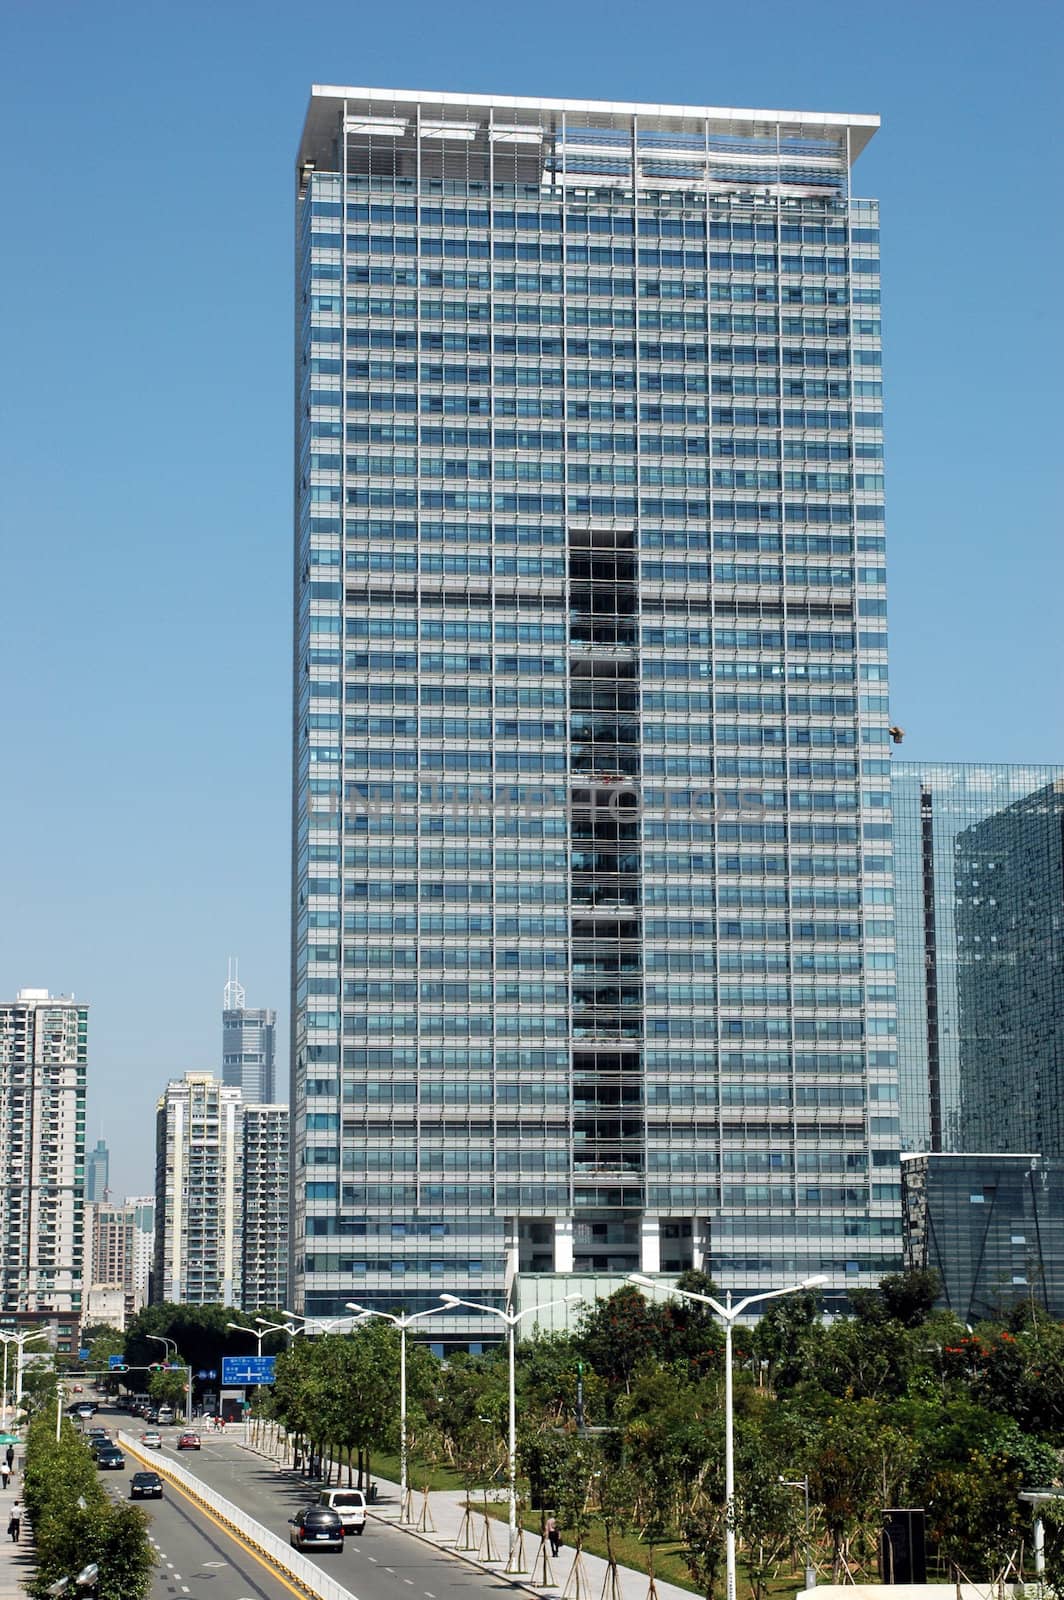 China, Guangdong province, Shenzhen city. Modern Chinese skyscrapers, office buildings in Futian district.